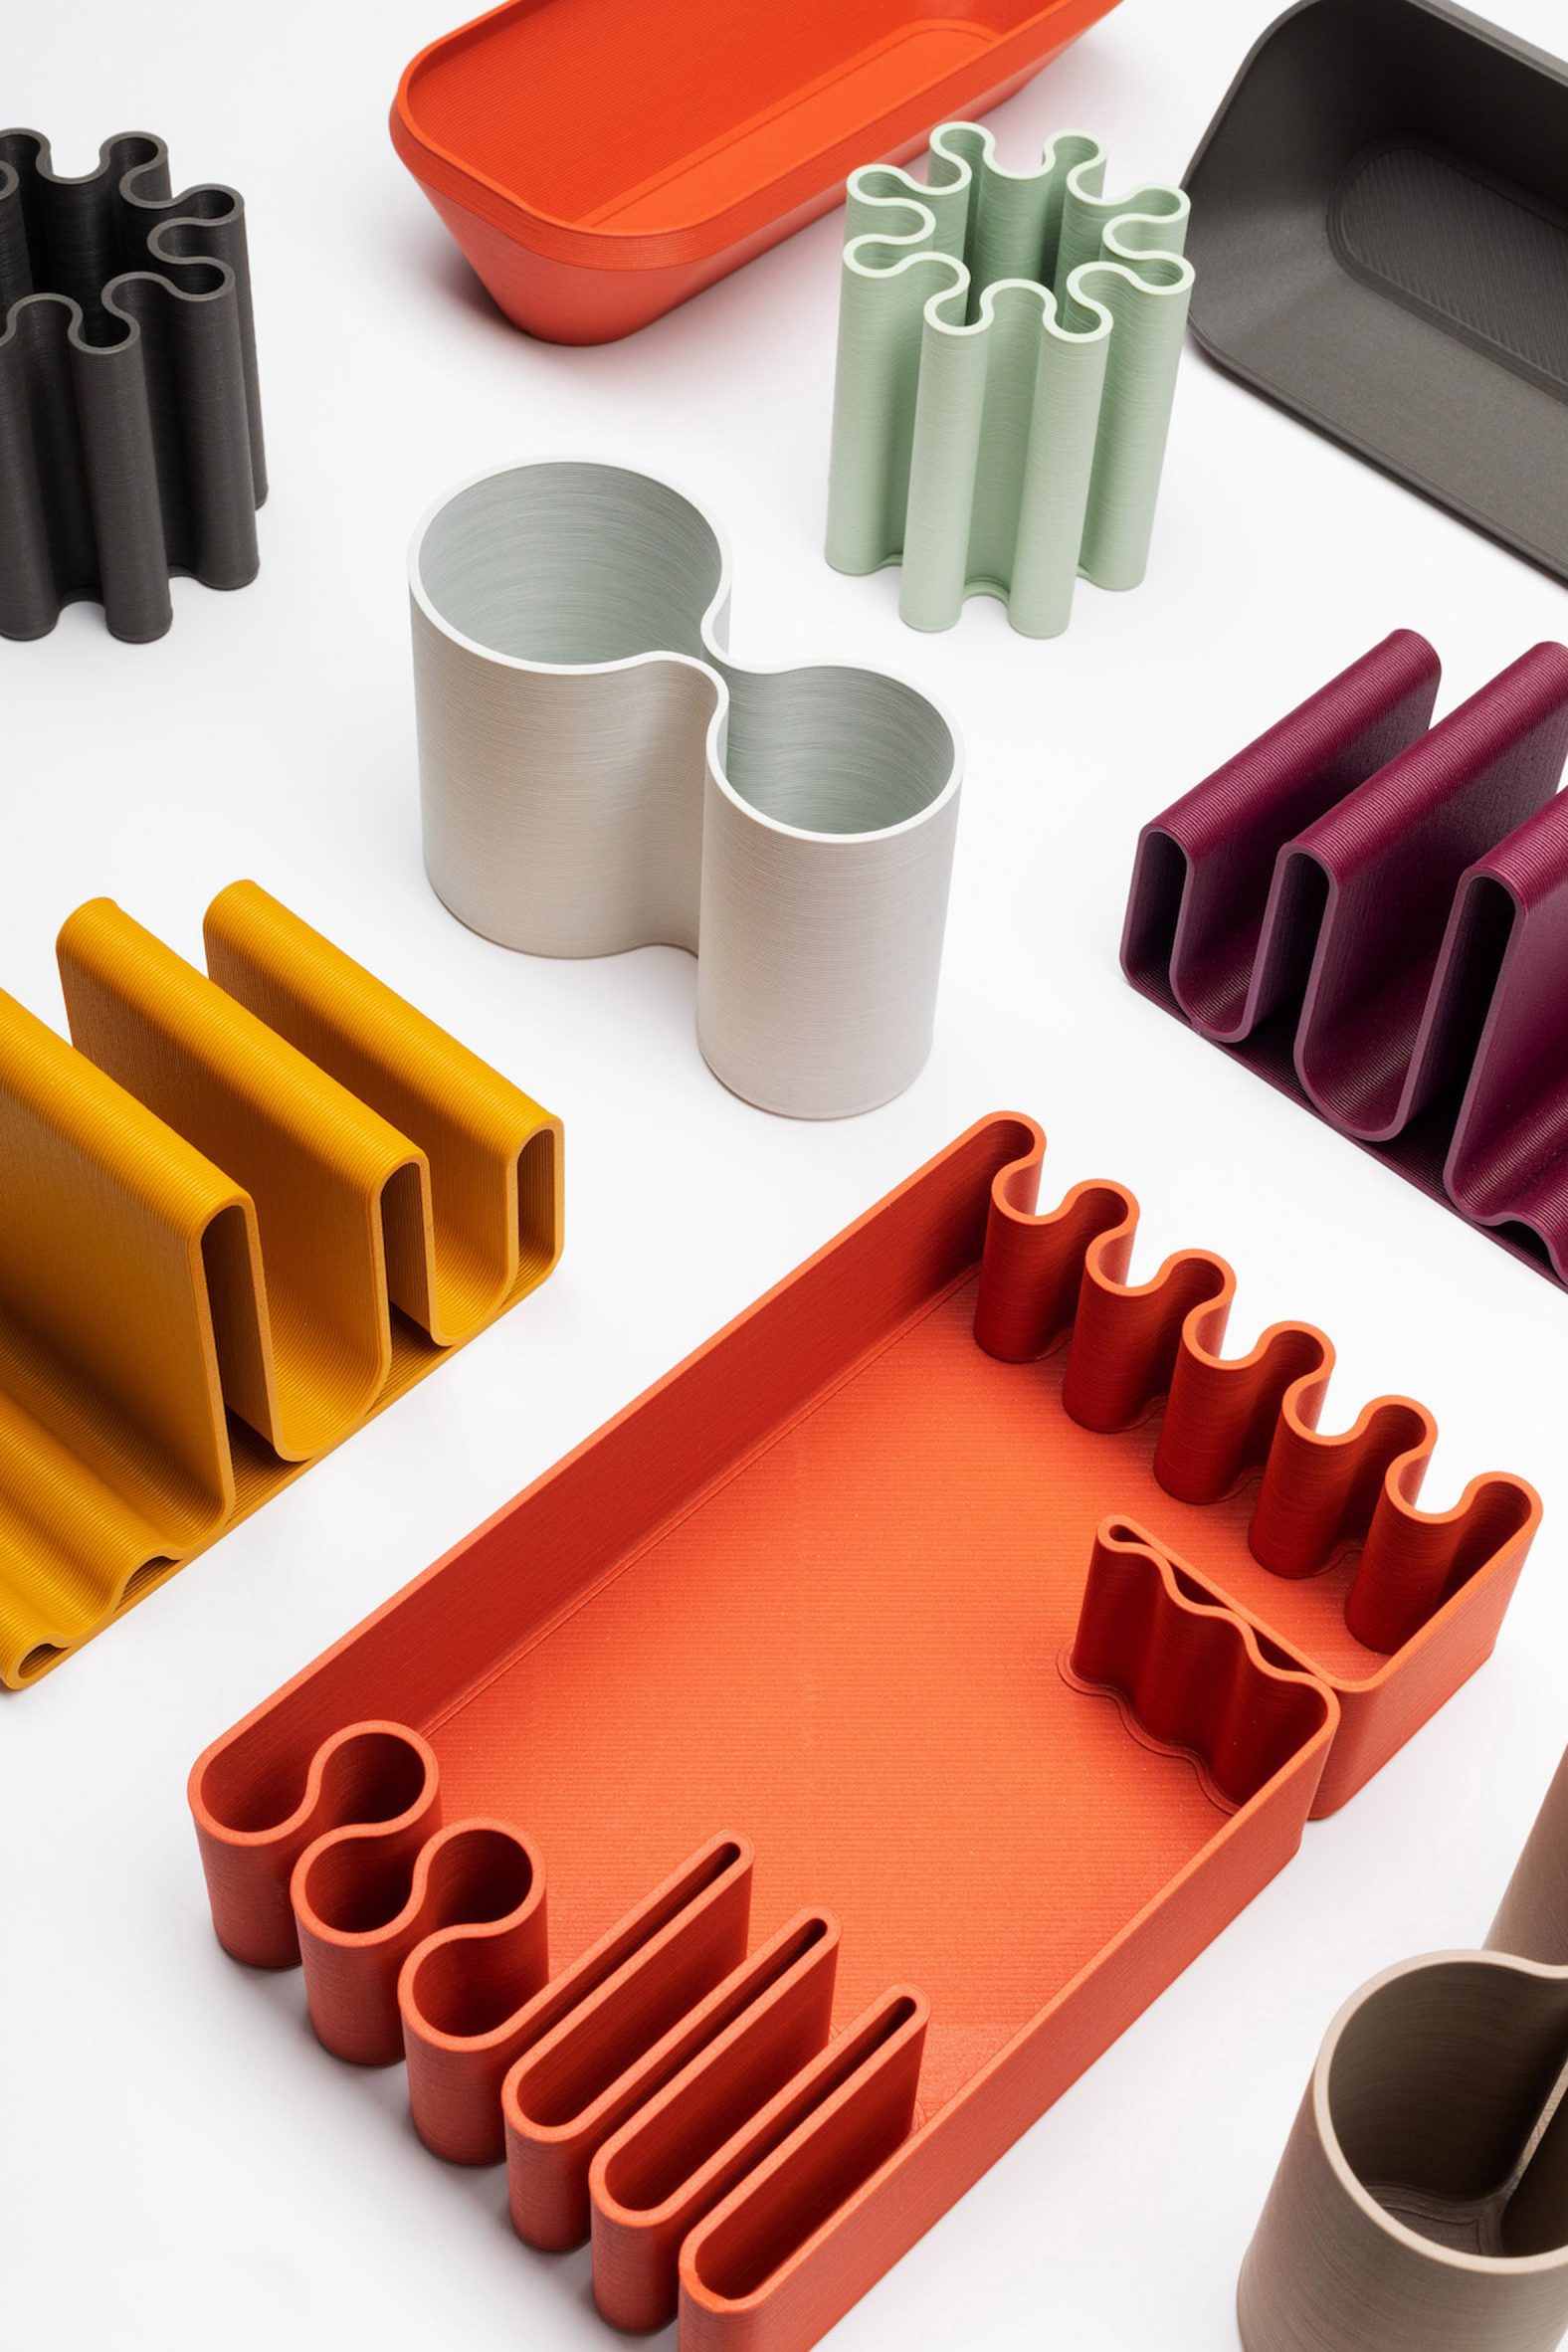 Items from the bFRIENDS collection of 3D-printed desk accessories